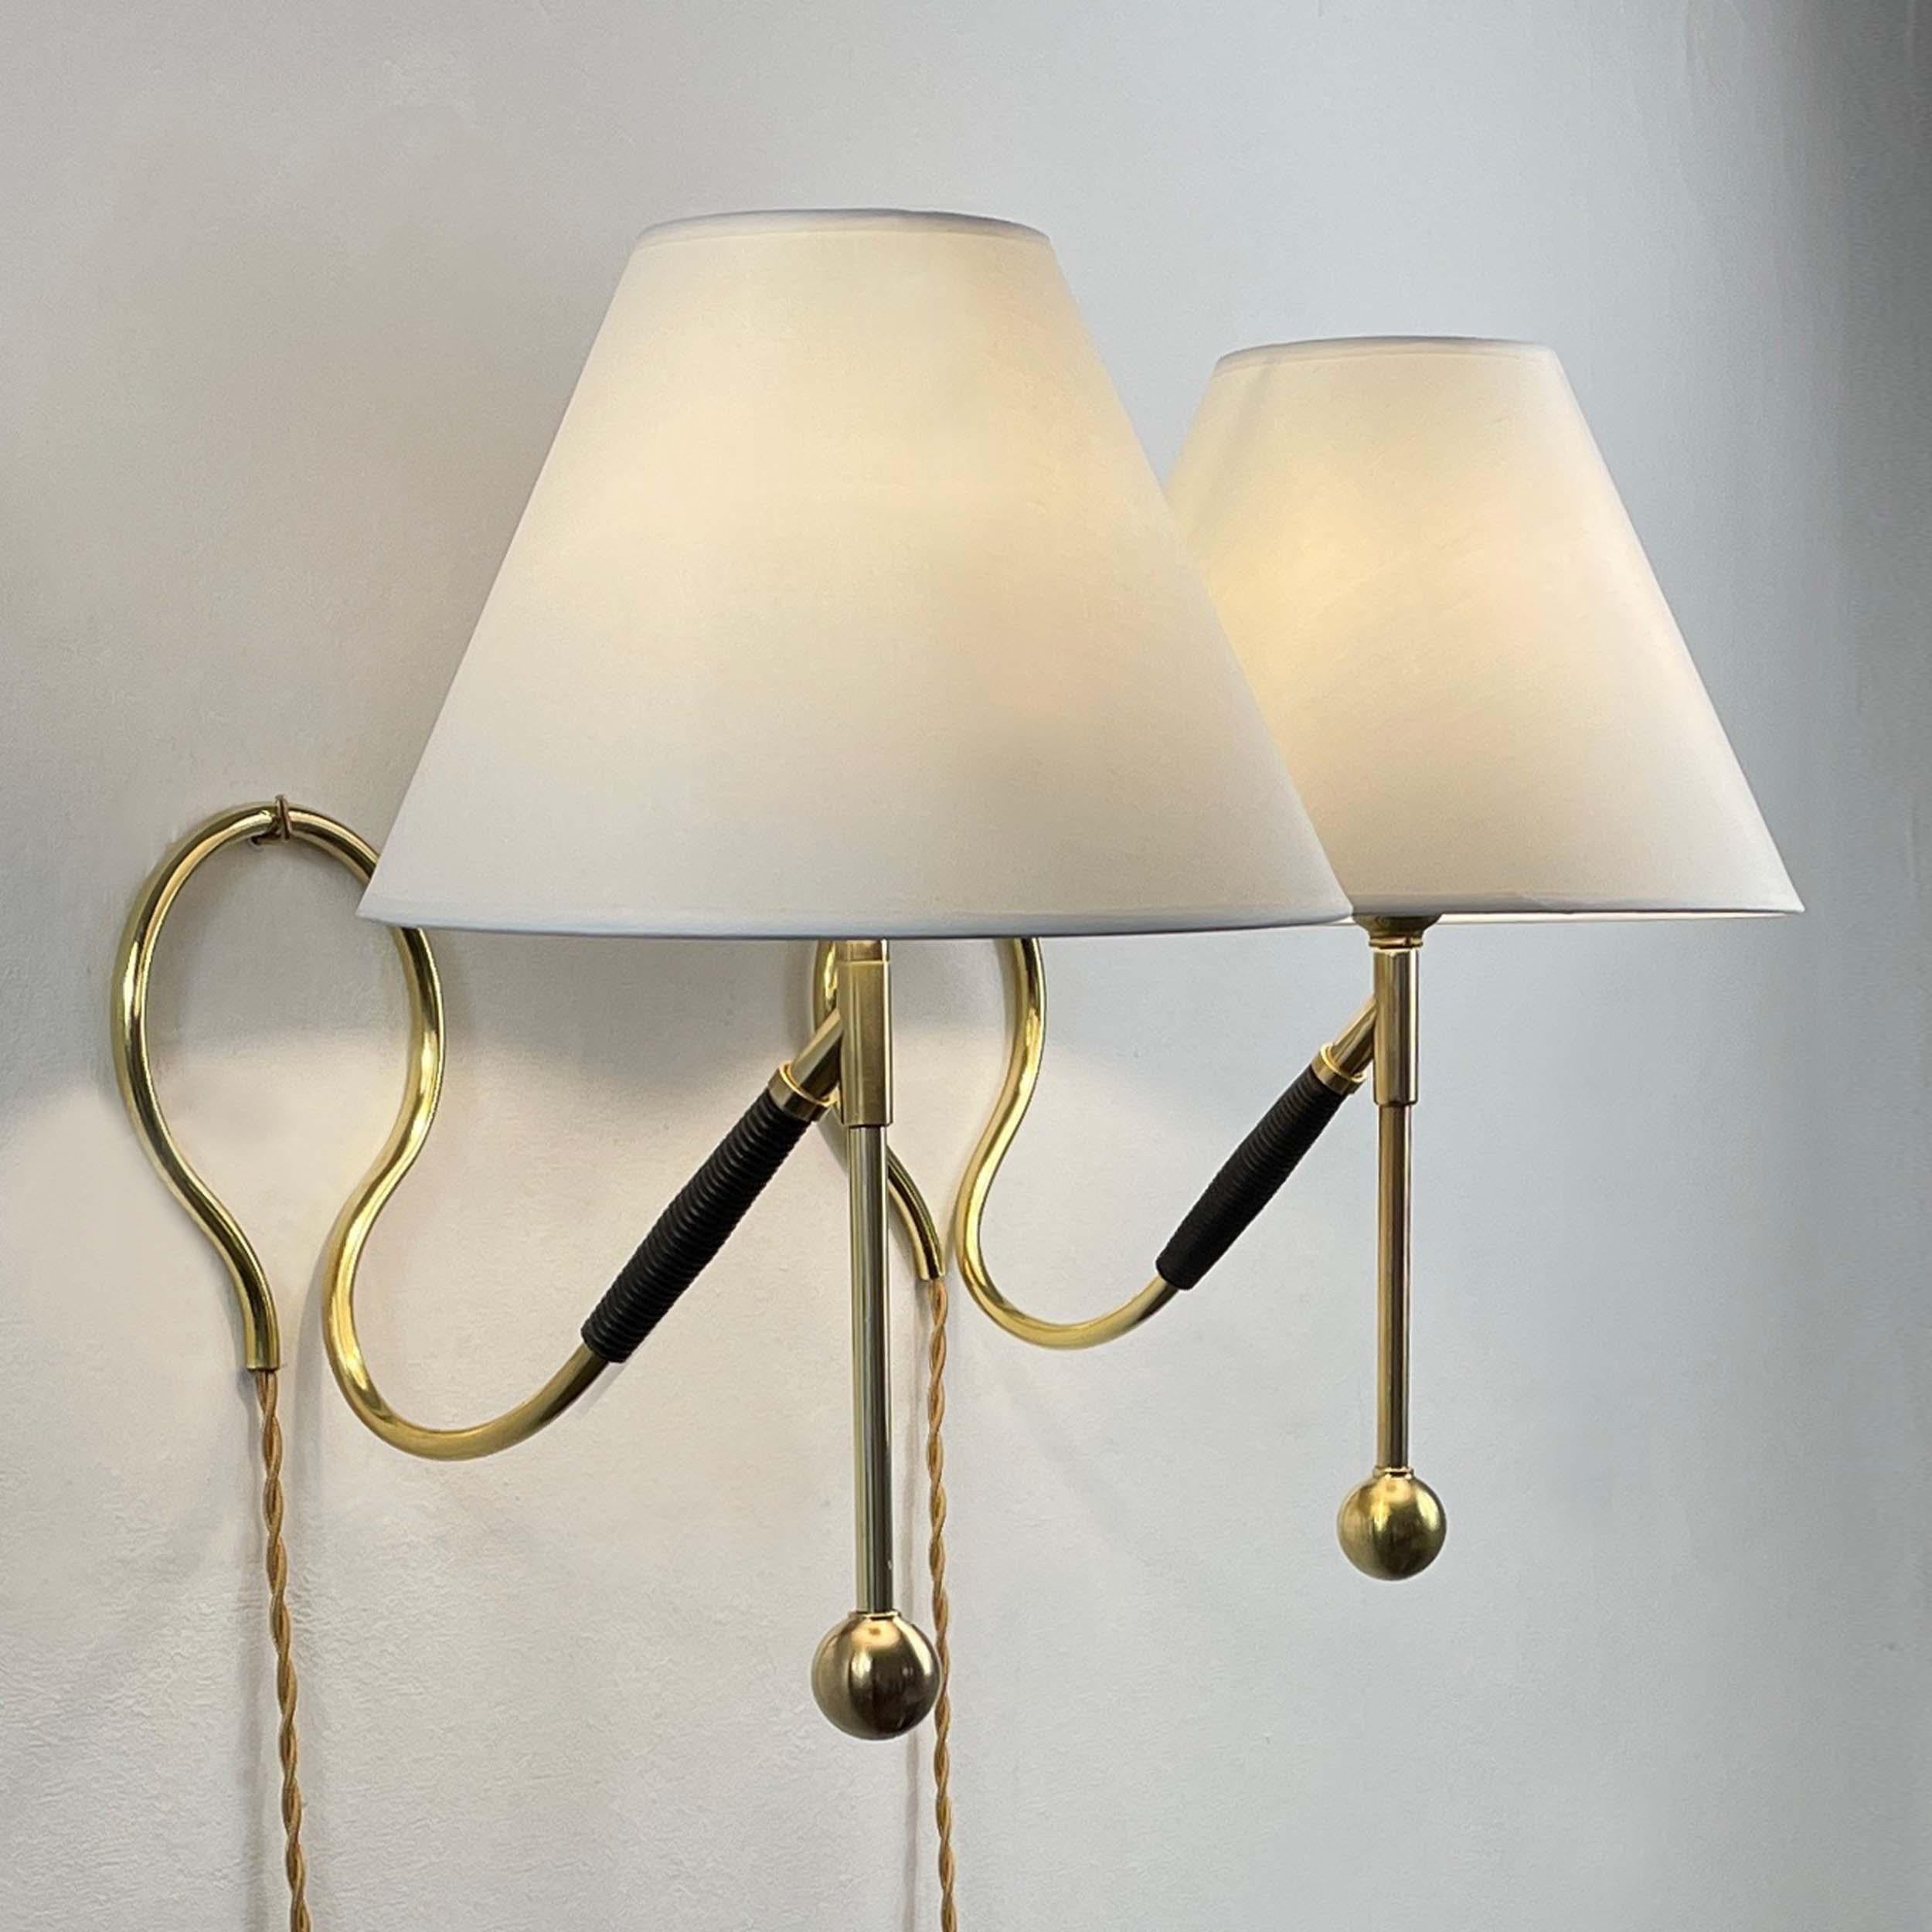 Adjustable Brass and Bakelite Wall and Table Lights 306 by Kaare Klint, 1950s For Sale 5